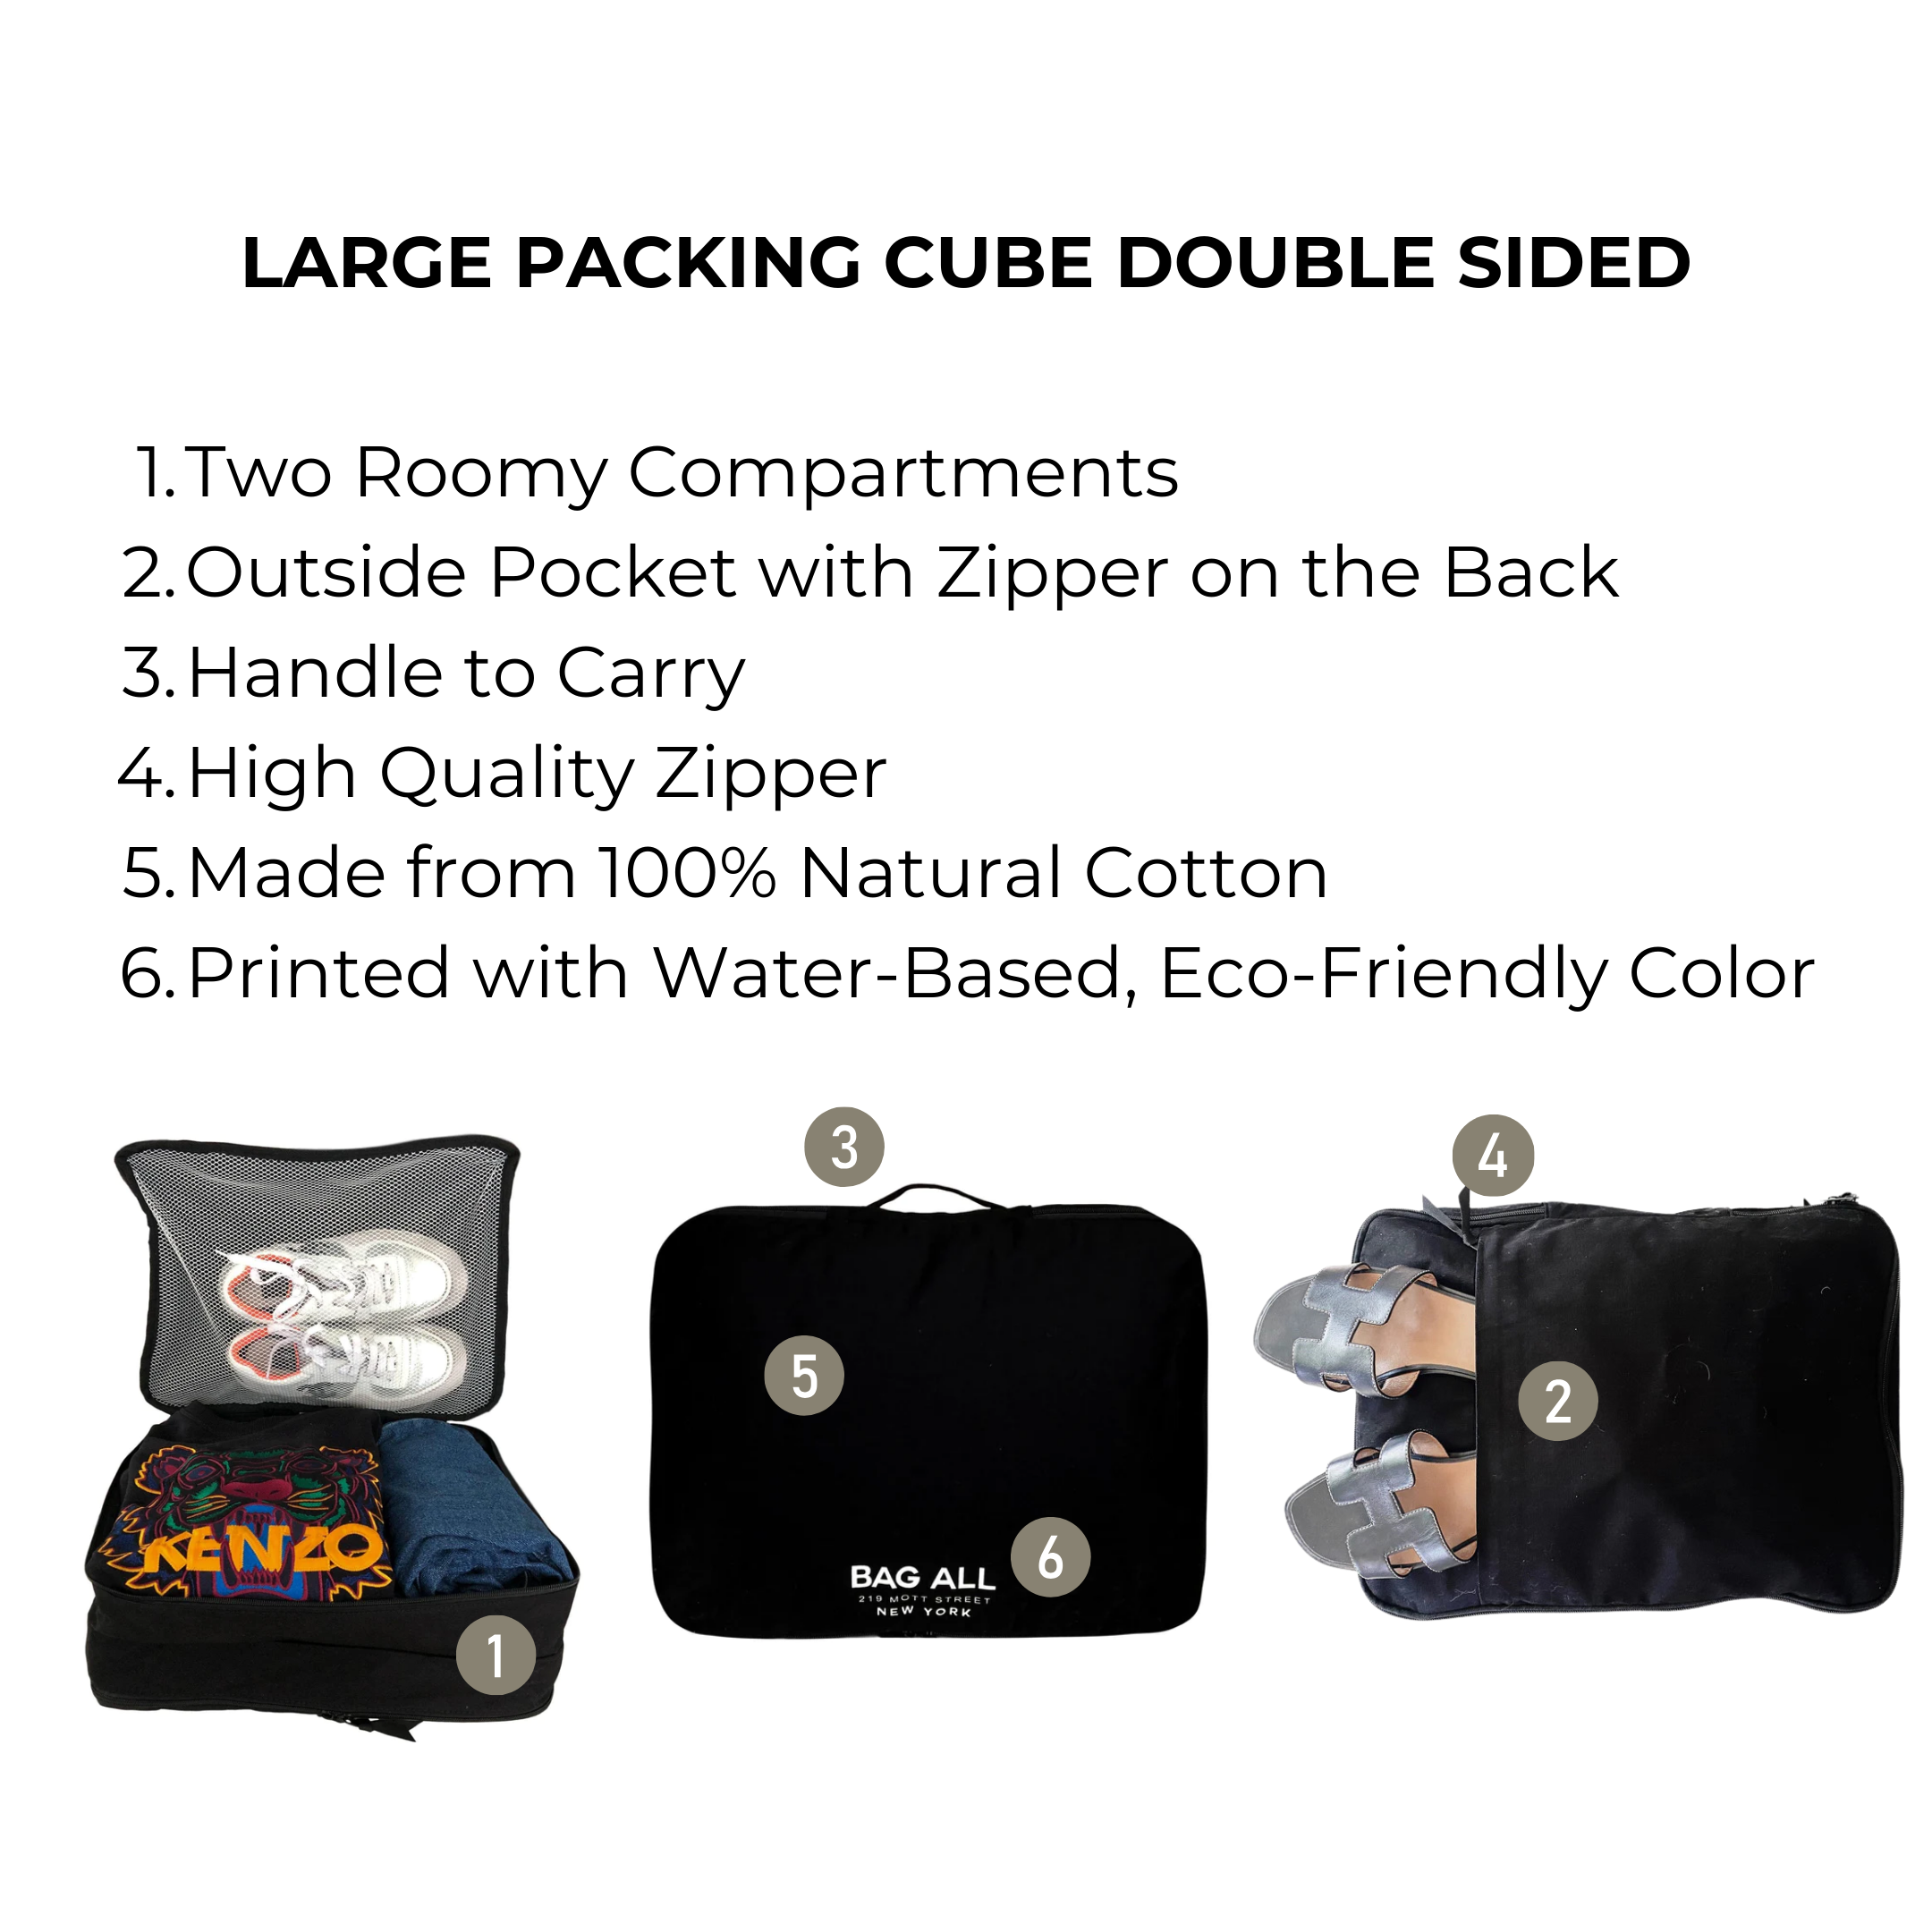 Large Packing Cube, Double Sided, Black | Bag-all